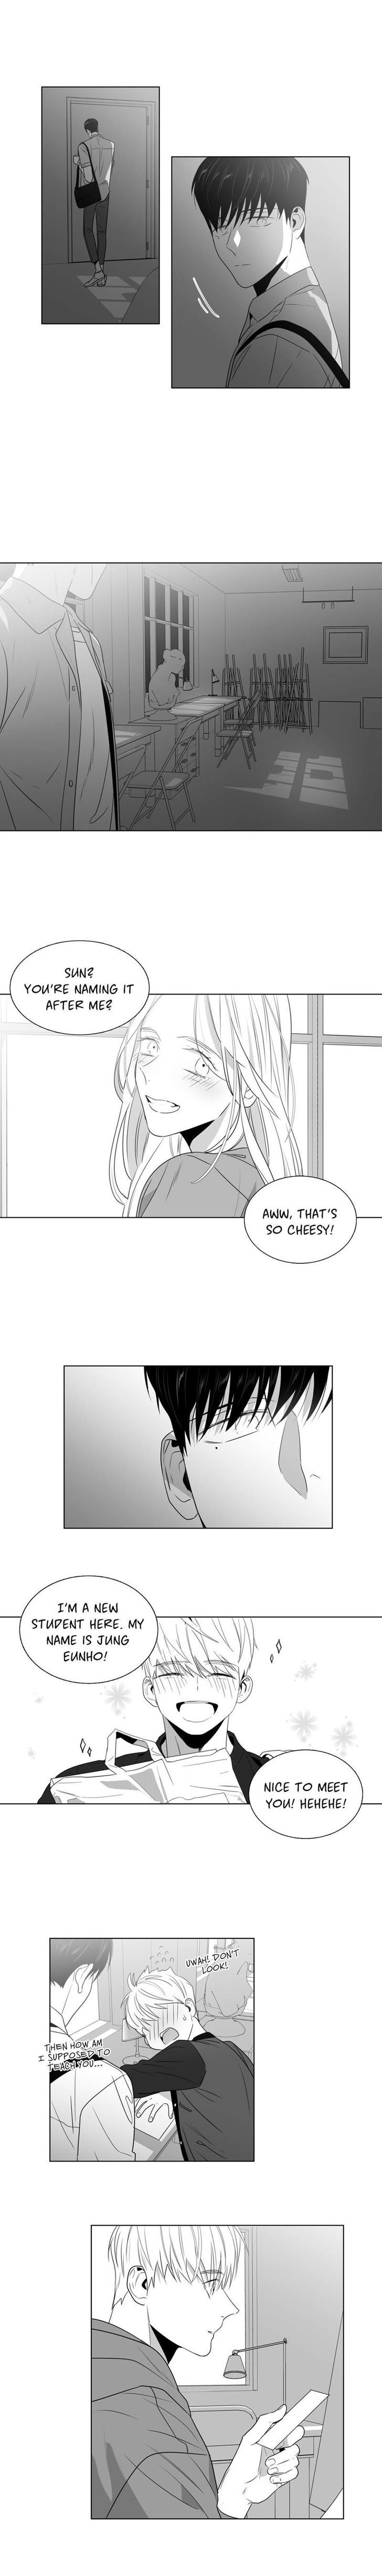 Lover Boy (Lezhin) Chapter 046 page 3